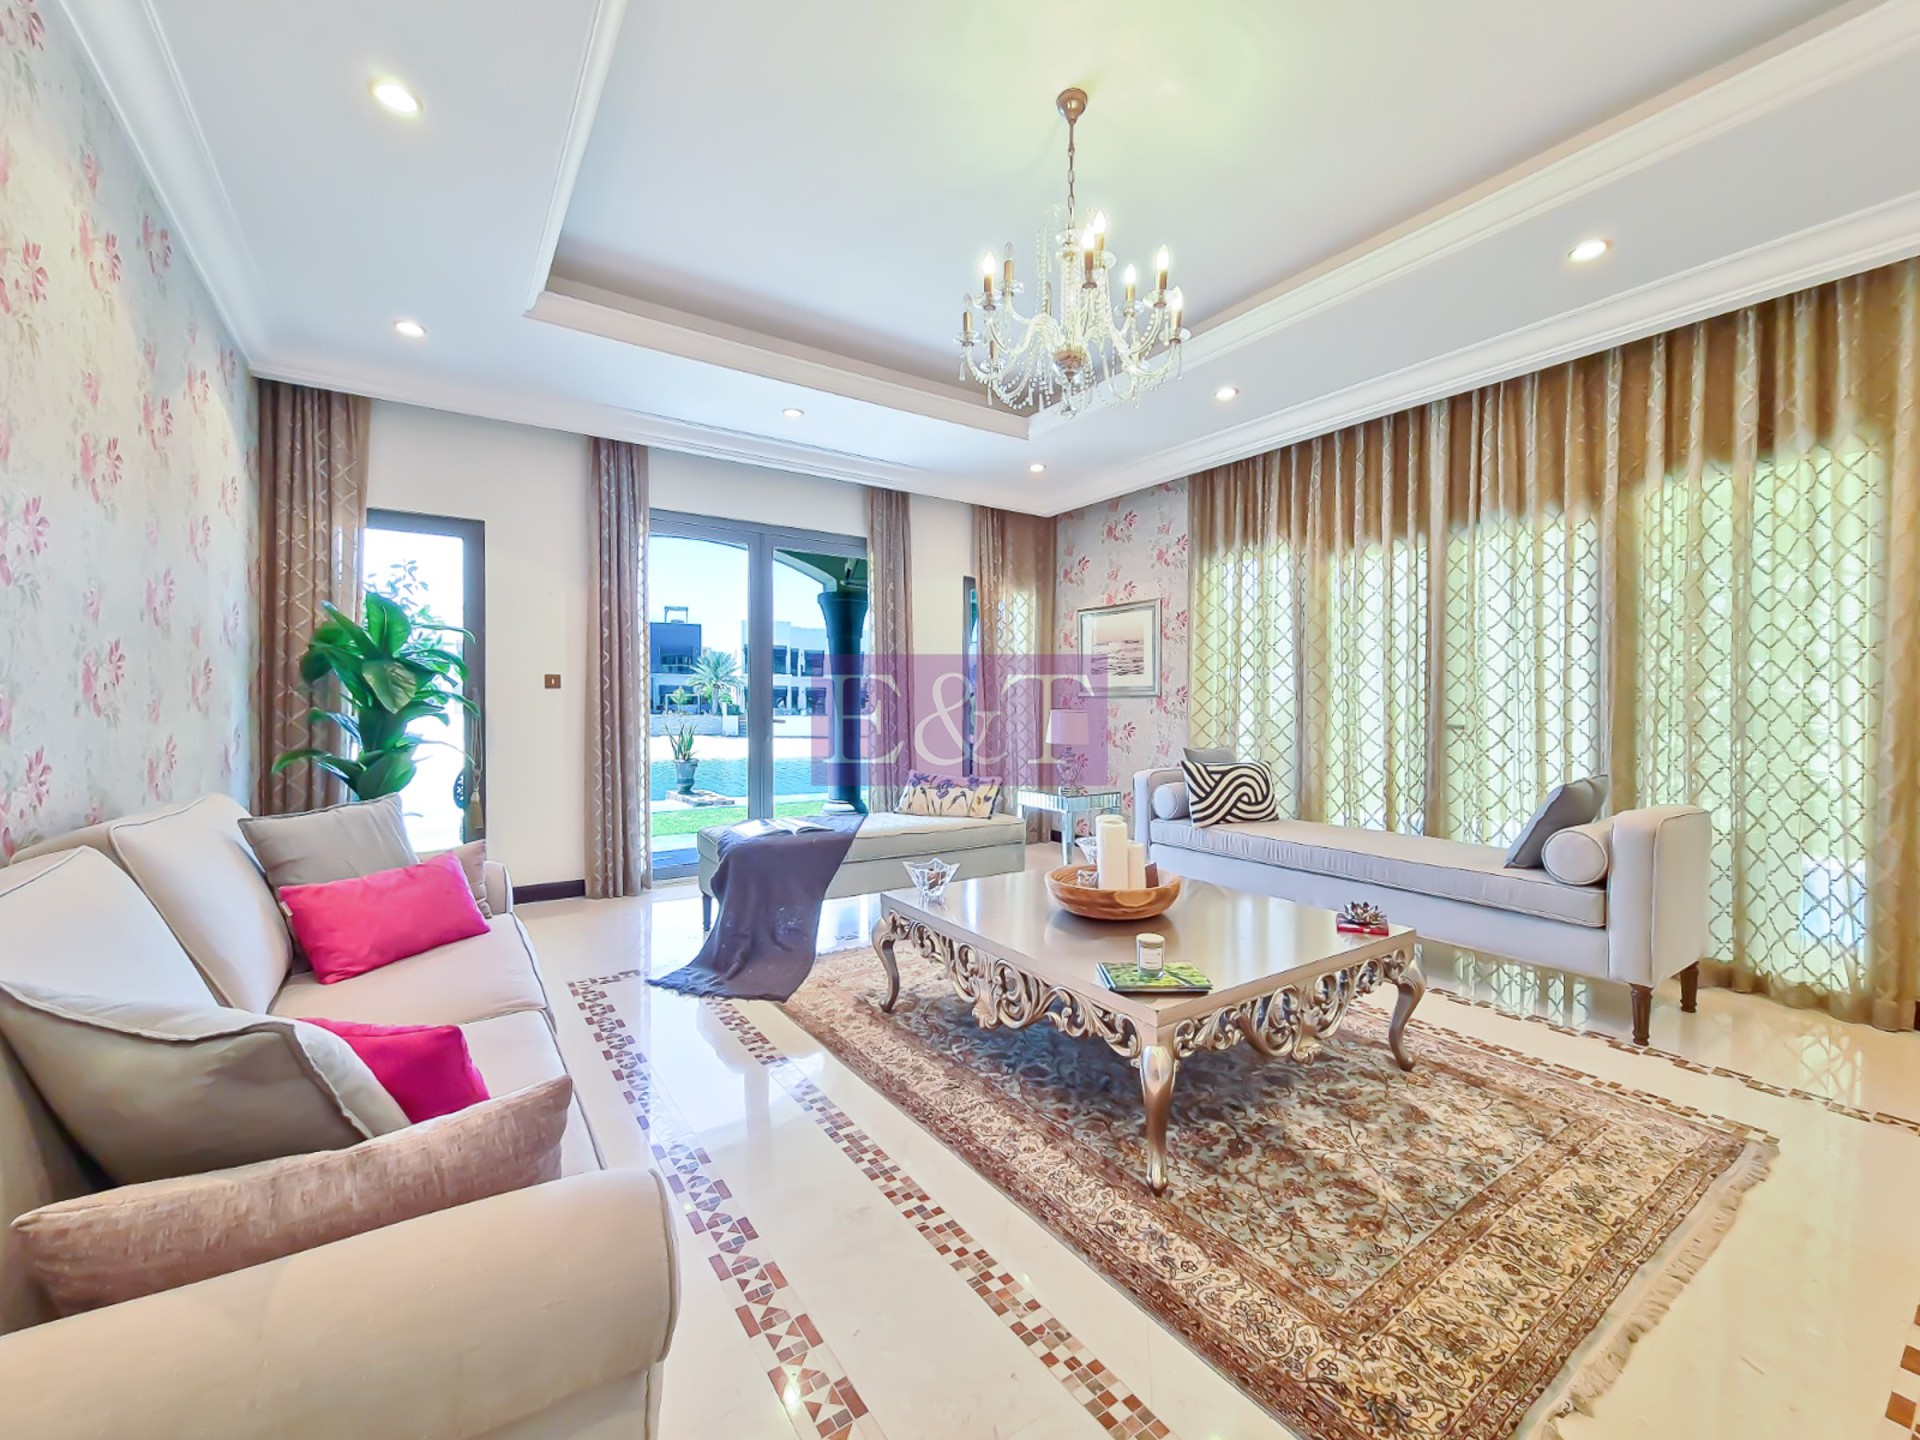 Vacant|Fully Furnished|5 Bedroom|Grand Foyer Beach